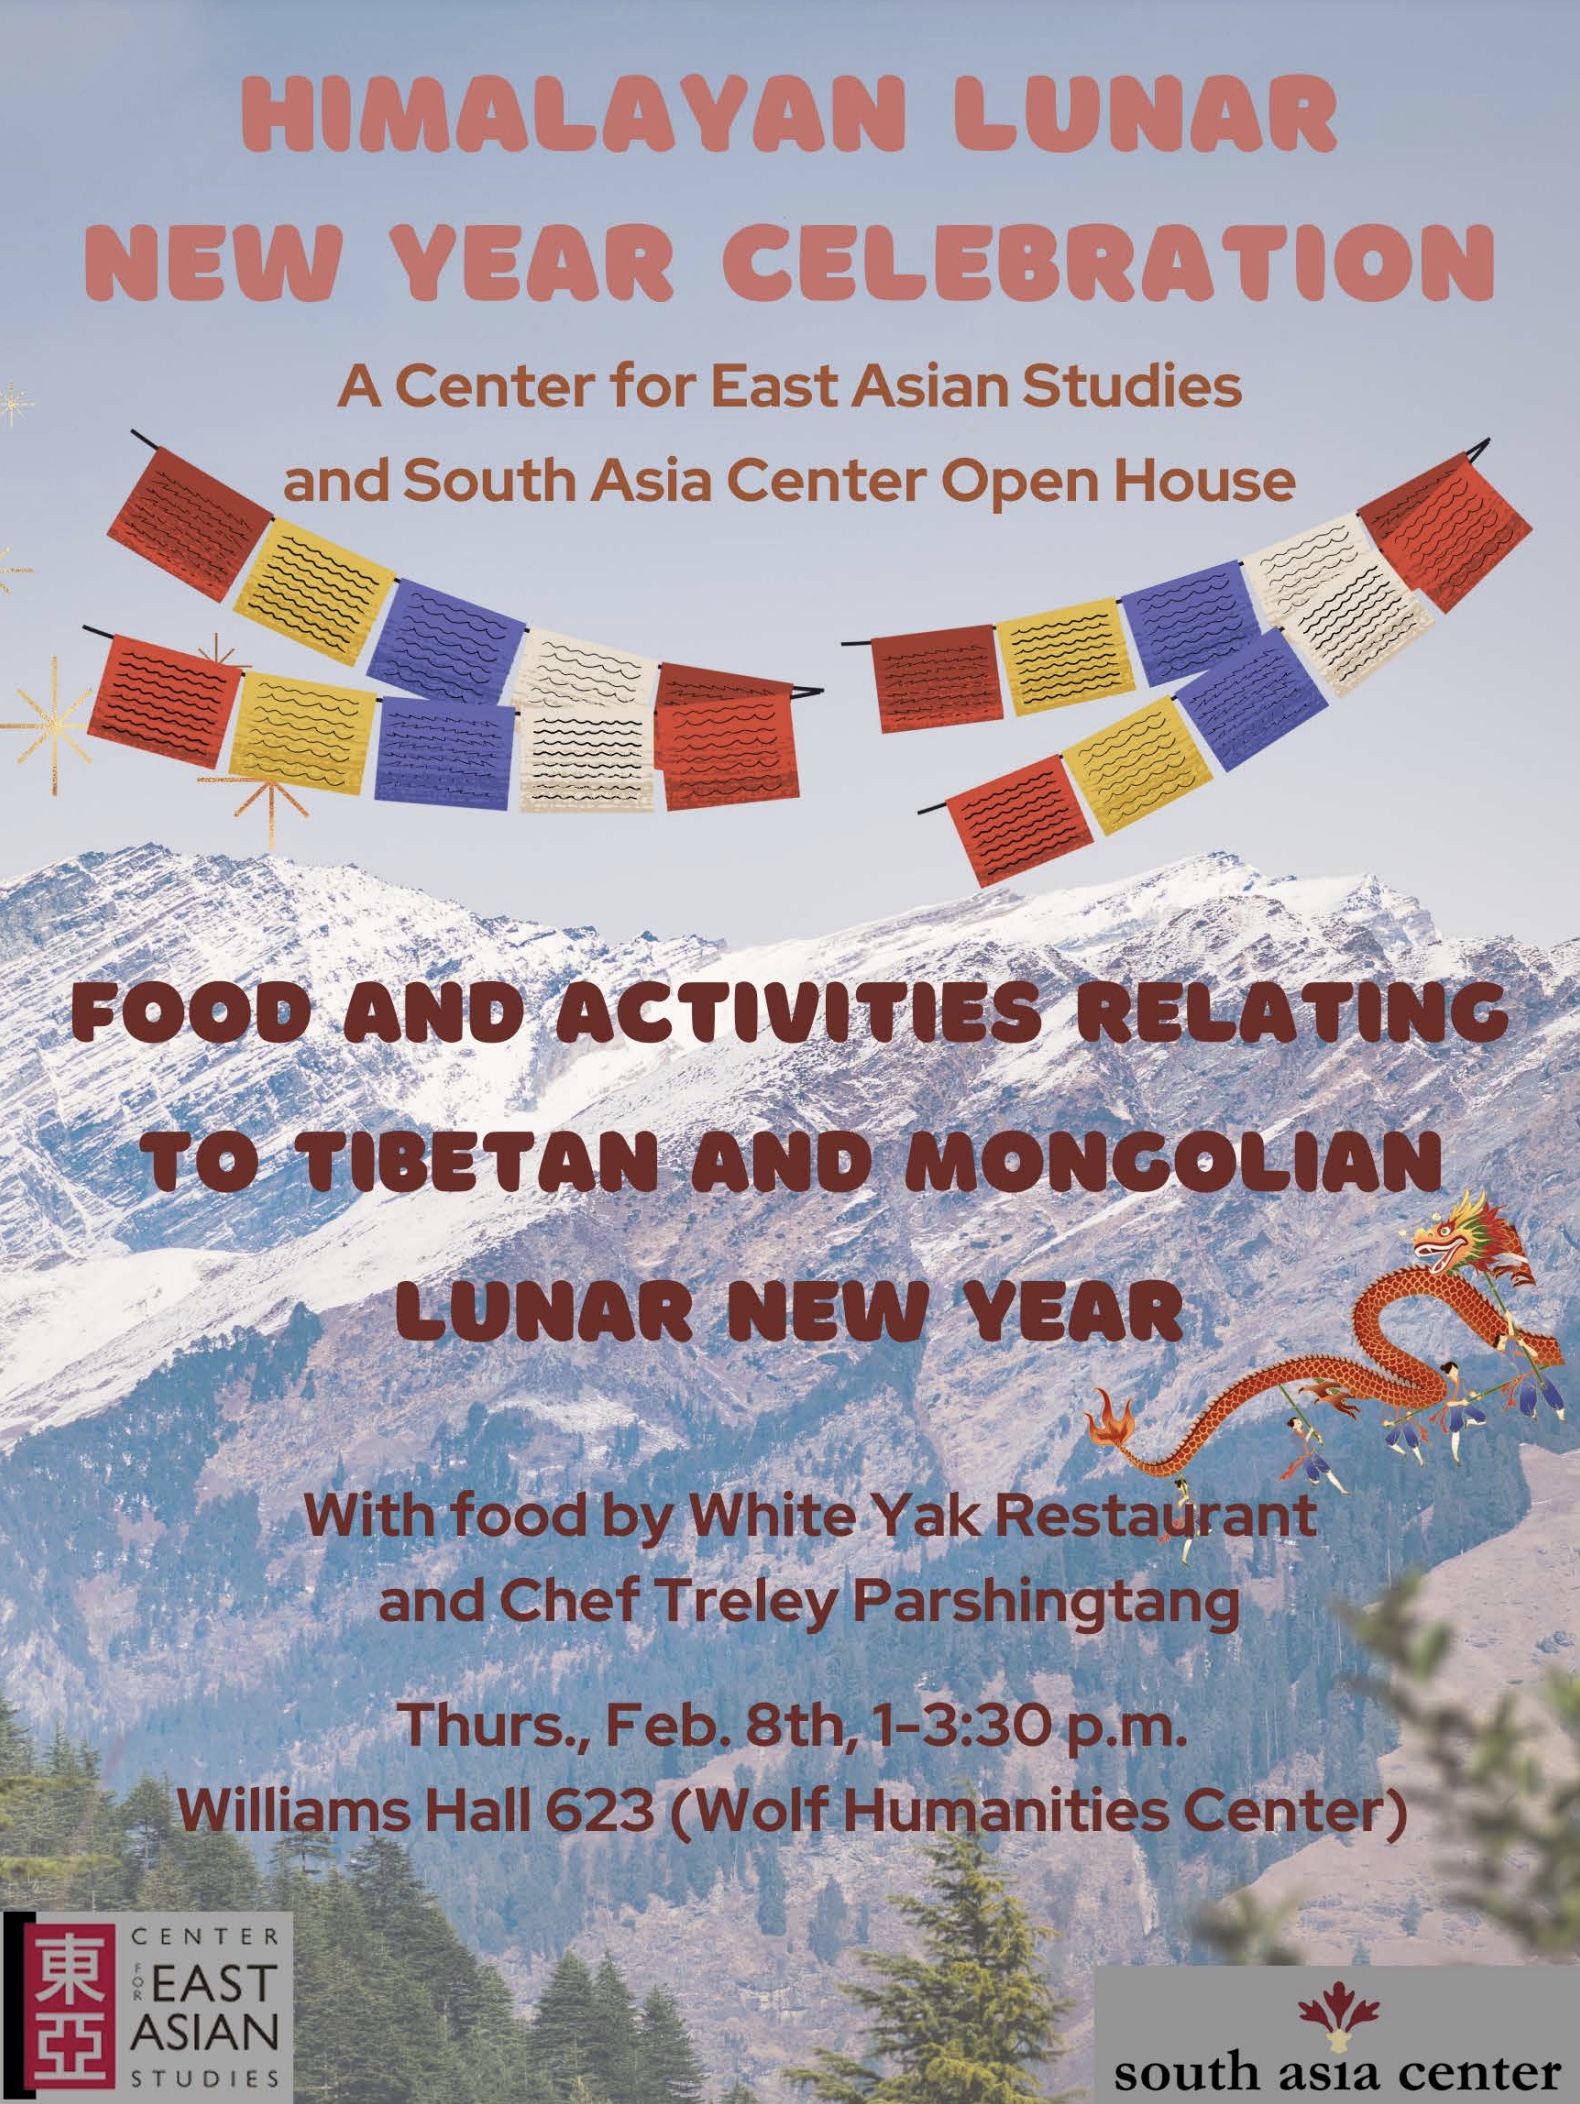 Flier for Himalayan Lunar New Year Event hosted by SAC and CEAS on February 8th in the Wolf Humanities Conference Room from 1-3:30pm. The background includes mountains and prayer flags.